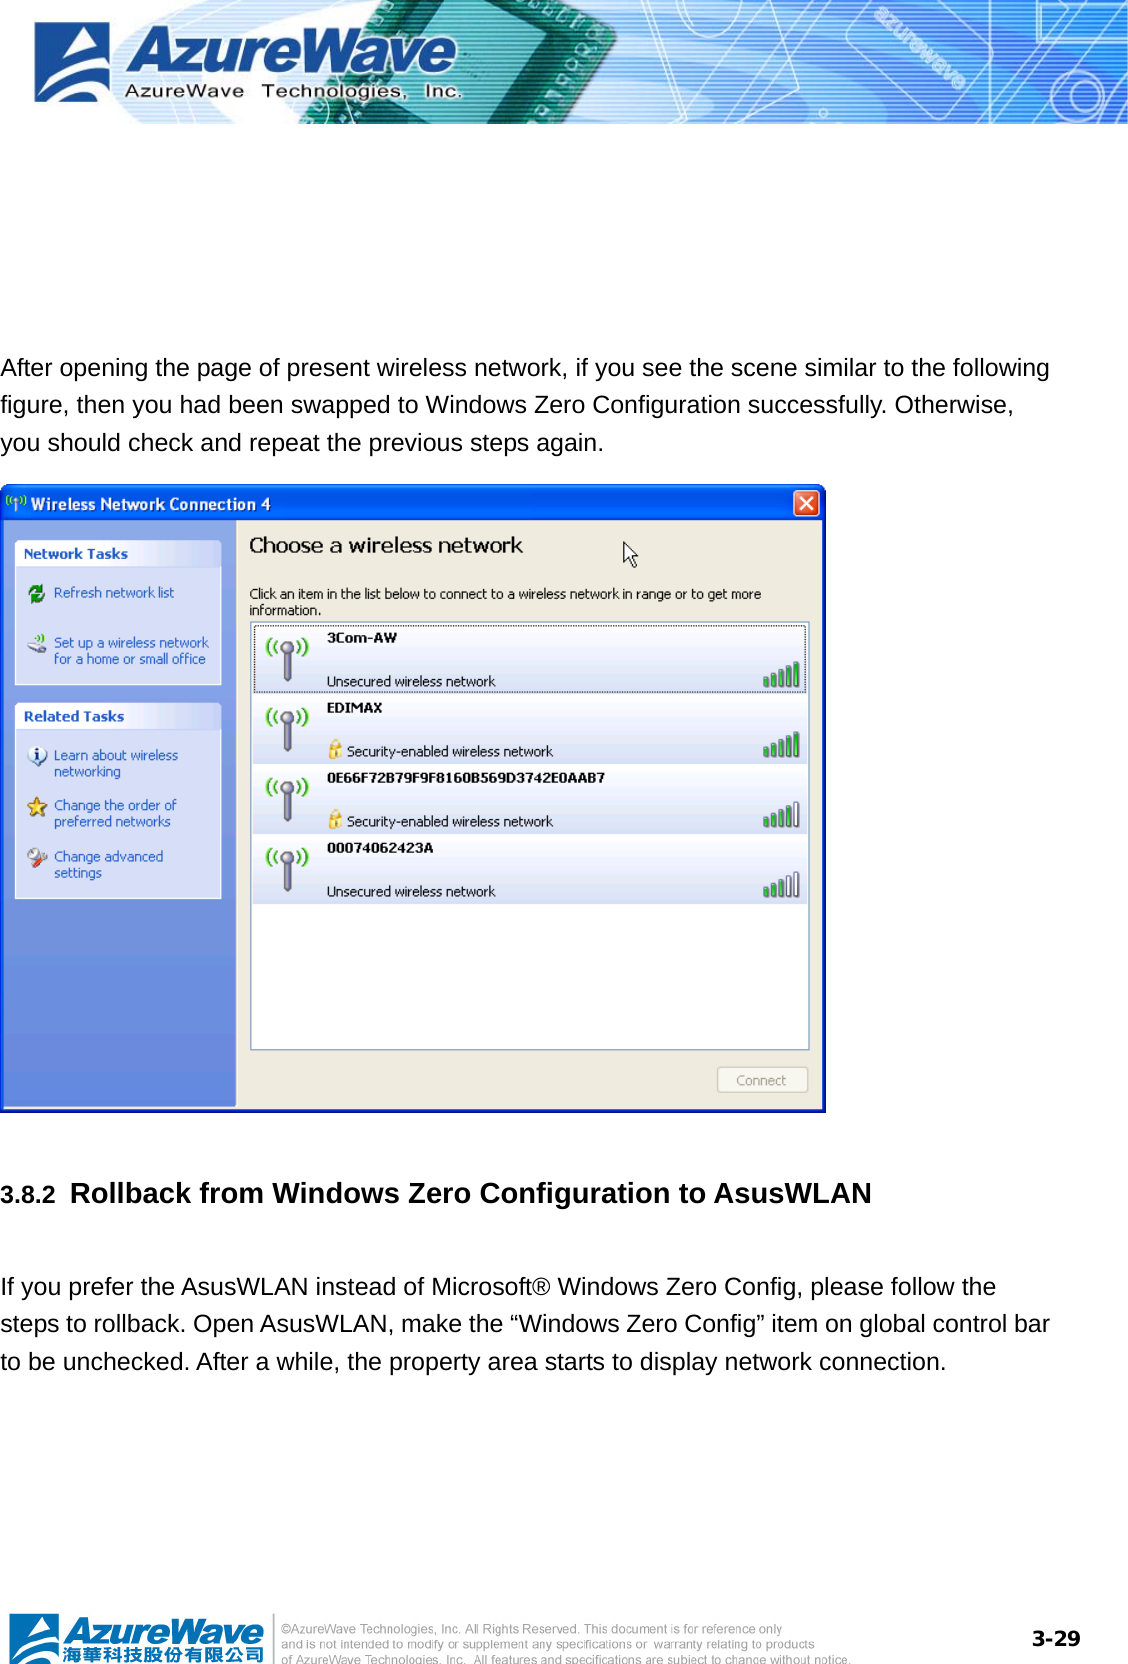  3-29    After opening the page of present wireless network, if you see the scene similar to the following figure, then you had been swapped to Windows Zero Configuration successfully. Otherwise, you should check and repeat the previous steps again.  3.8.2  Rollback from Windows Zero Configuration to AsusWLAN If you prefer the AsusWLAN instead of Microsoft® Windows Zero Config, please follow the steps to rollback. Open AsusWLAN, make the “Windows Zero Config” item on global control bar to be unchecked. After a while, the property area starts to display network connection.   